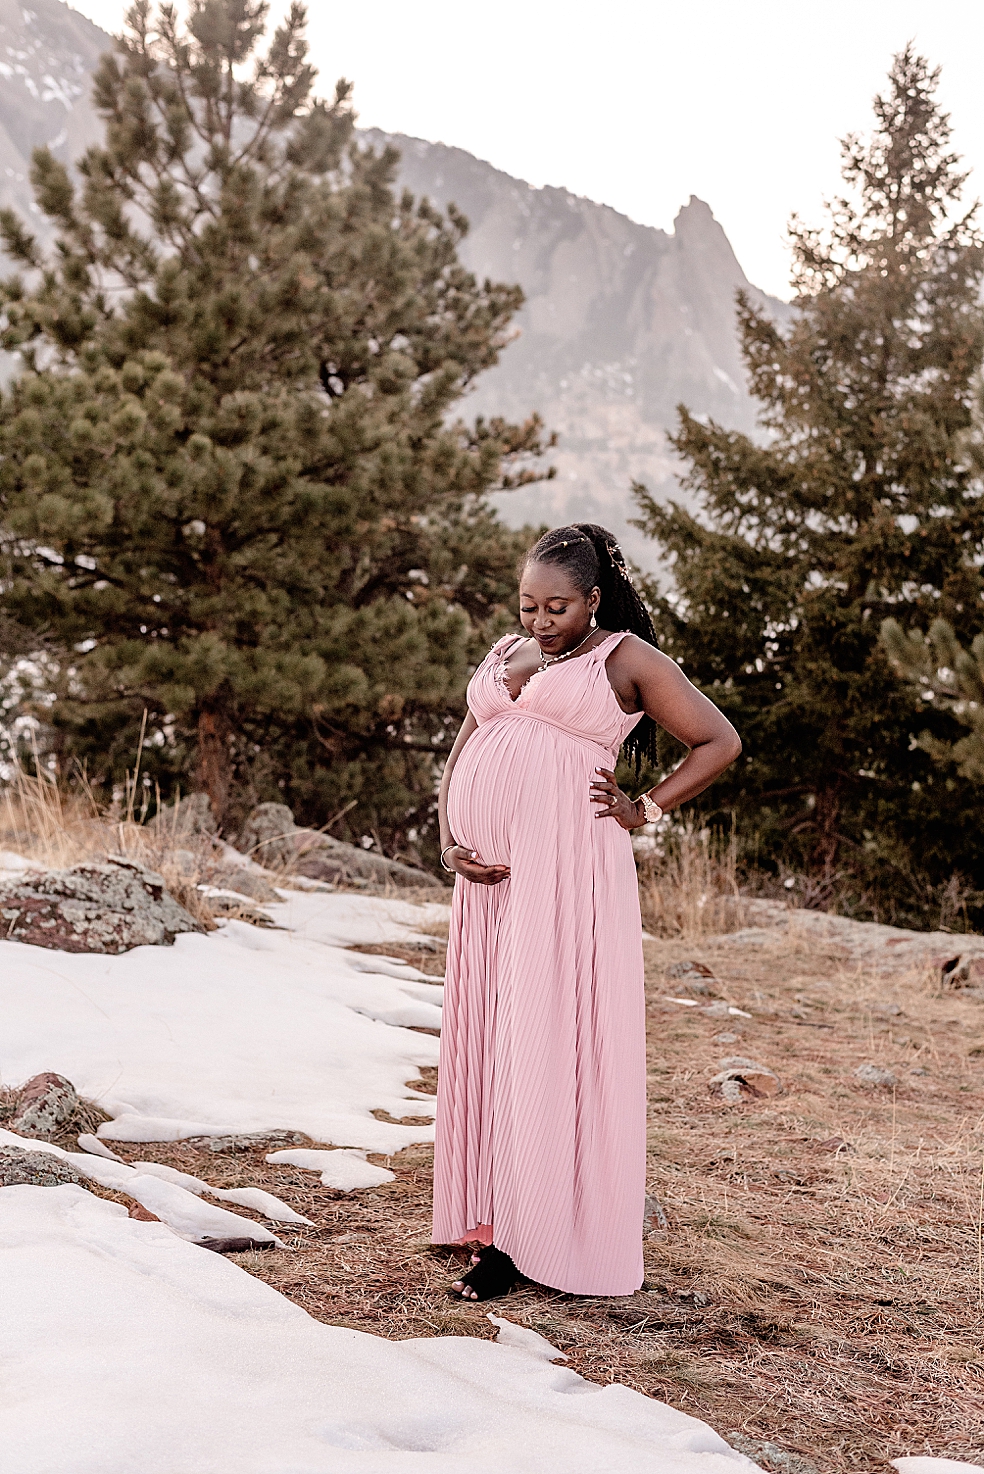 Mom to be in pink dress holding her belly | Photo by Jessica Lee Photography